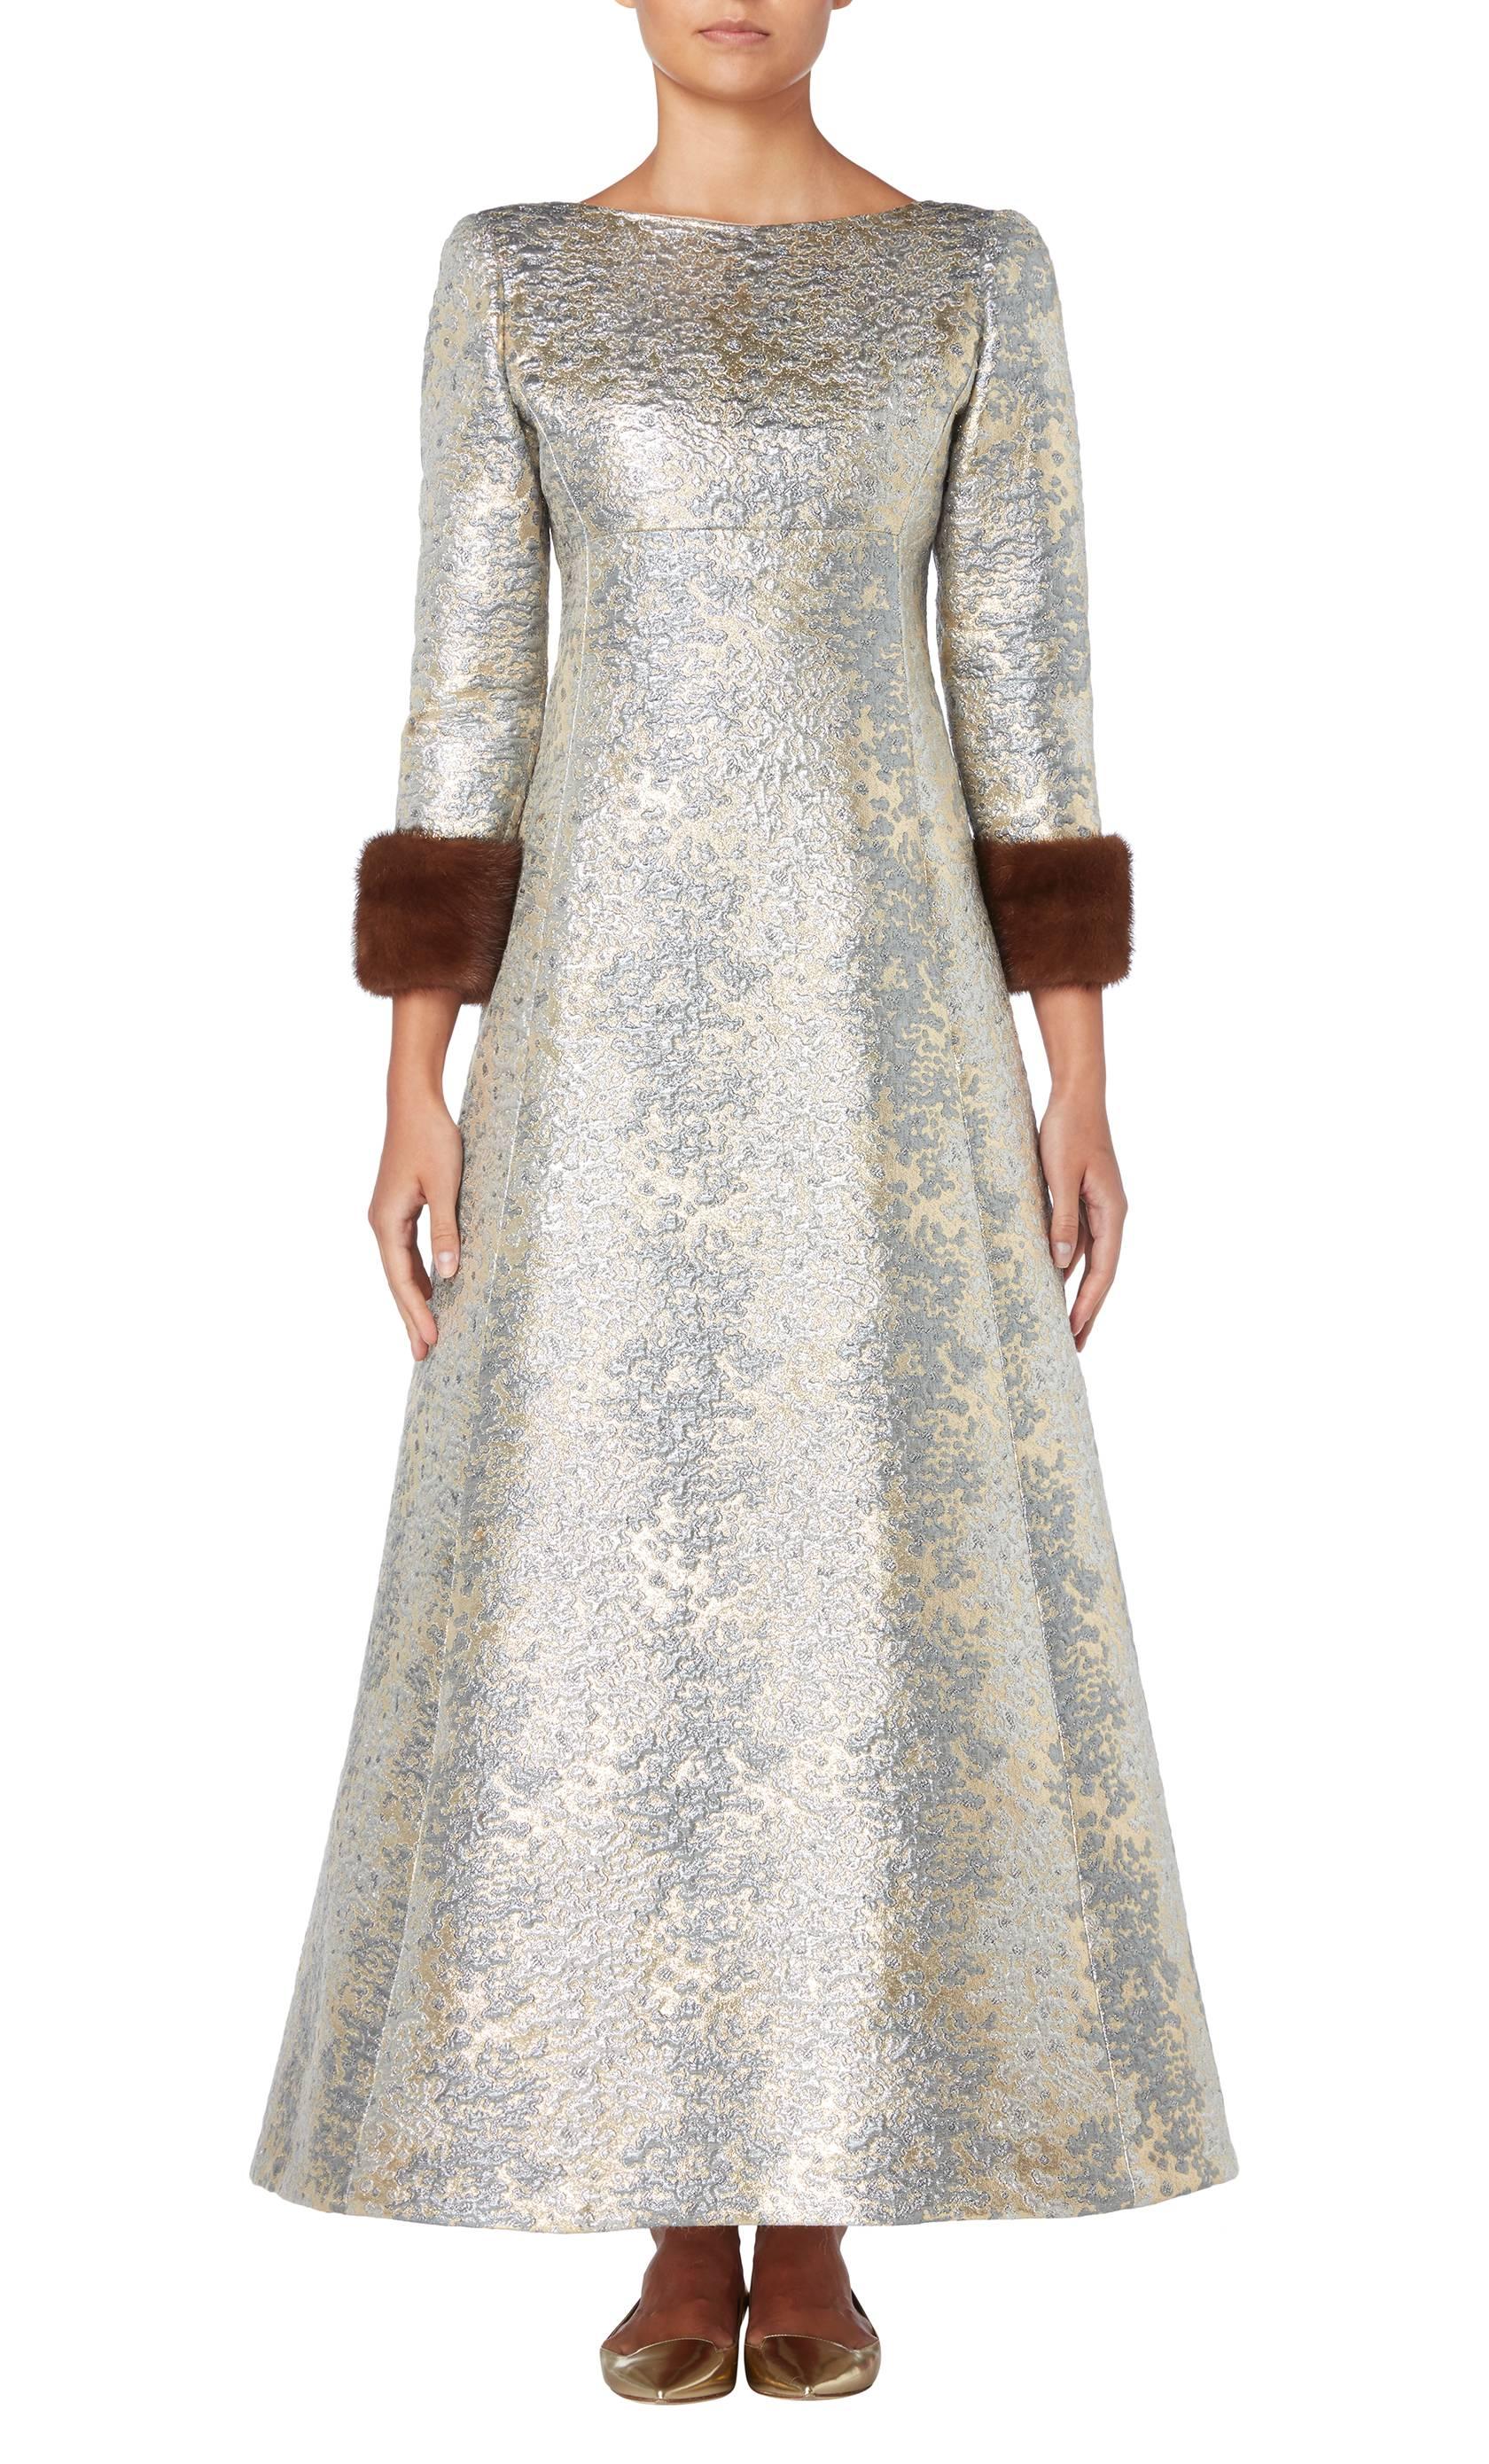 This Malcolm Starr evening dress will make an opulent choice for red carpet events. Designed by Elinor Simmons, the dress is constructed from blue, silver and gold brocade and features three-quarter length sleeves with brown mink fur cuffs. A square